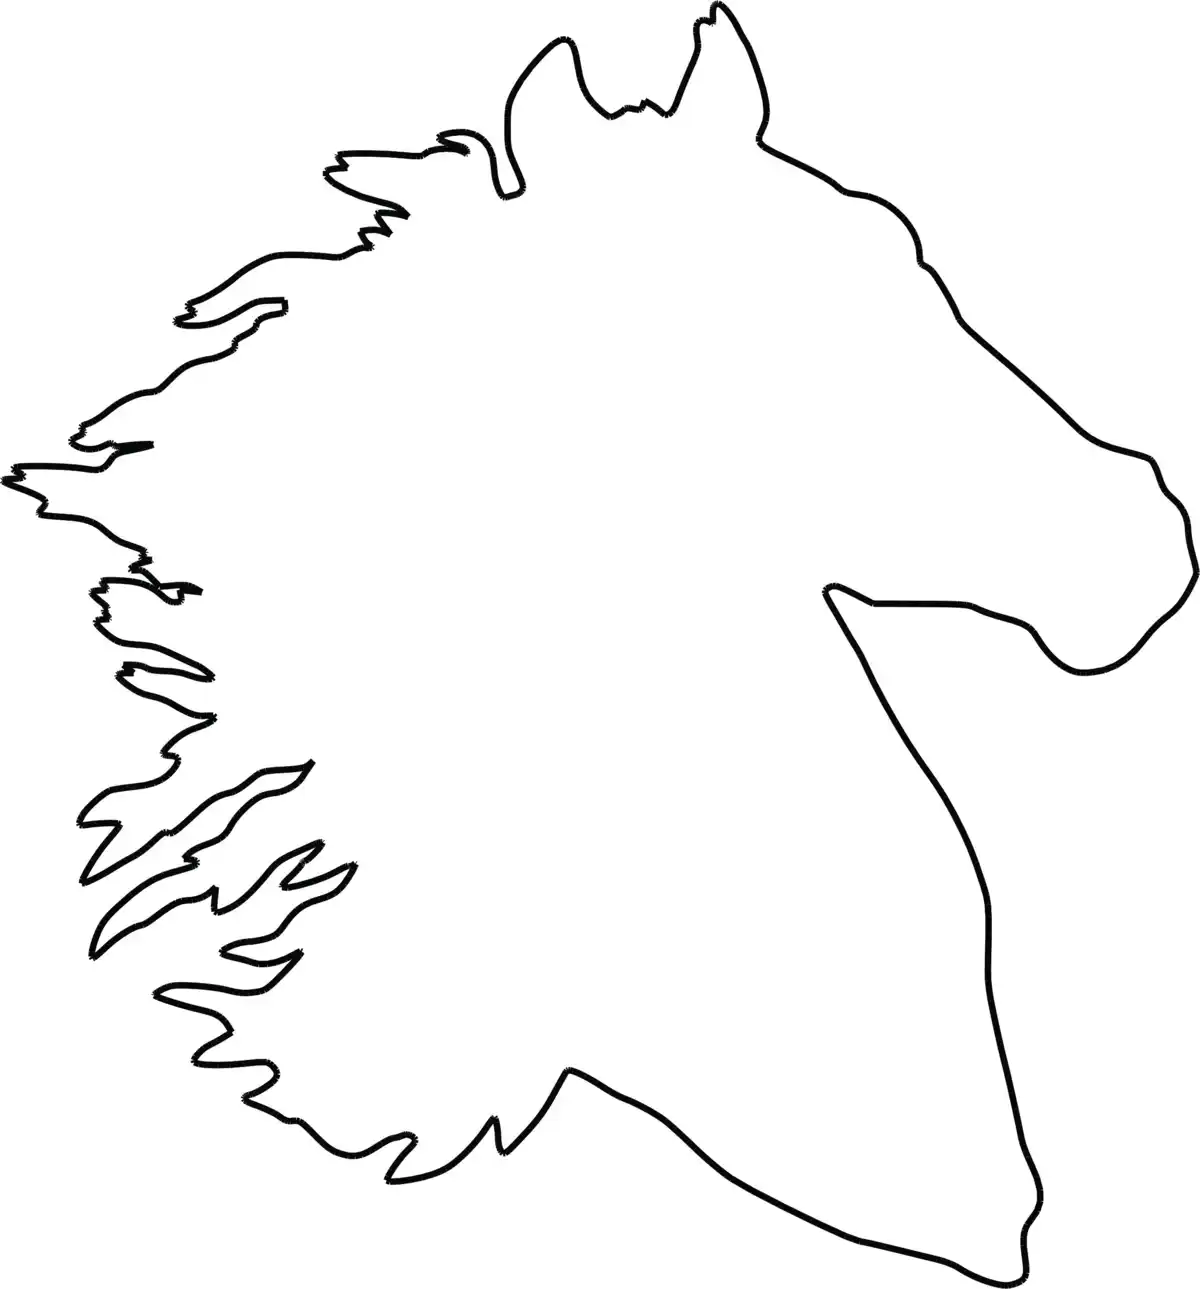 Free Download Coloring PDF, Horse Head Silhouette Kids Coloring Pages Pdf